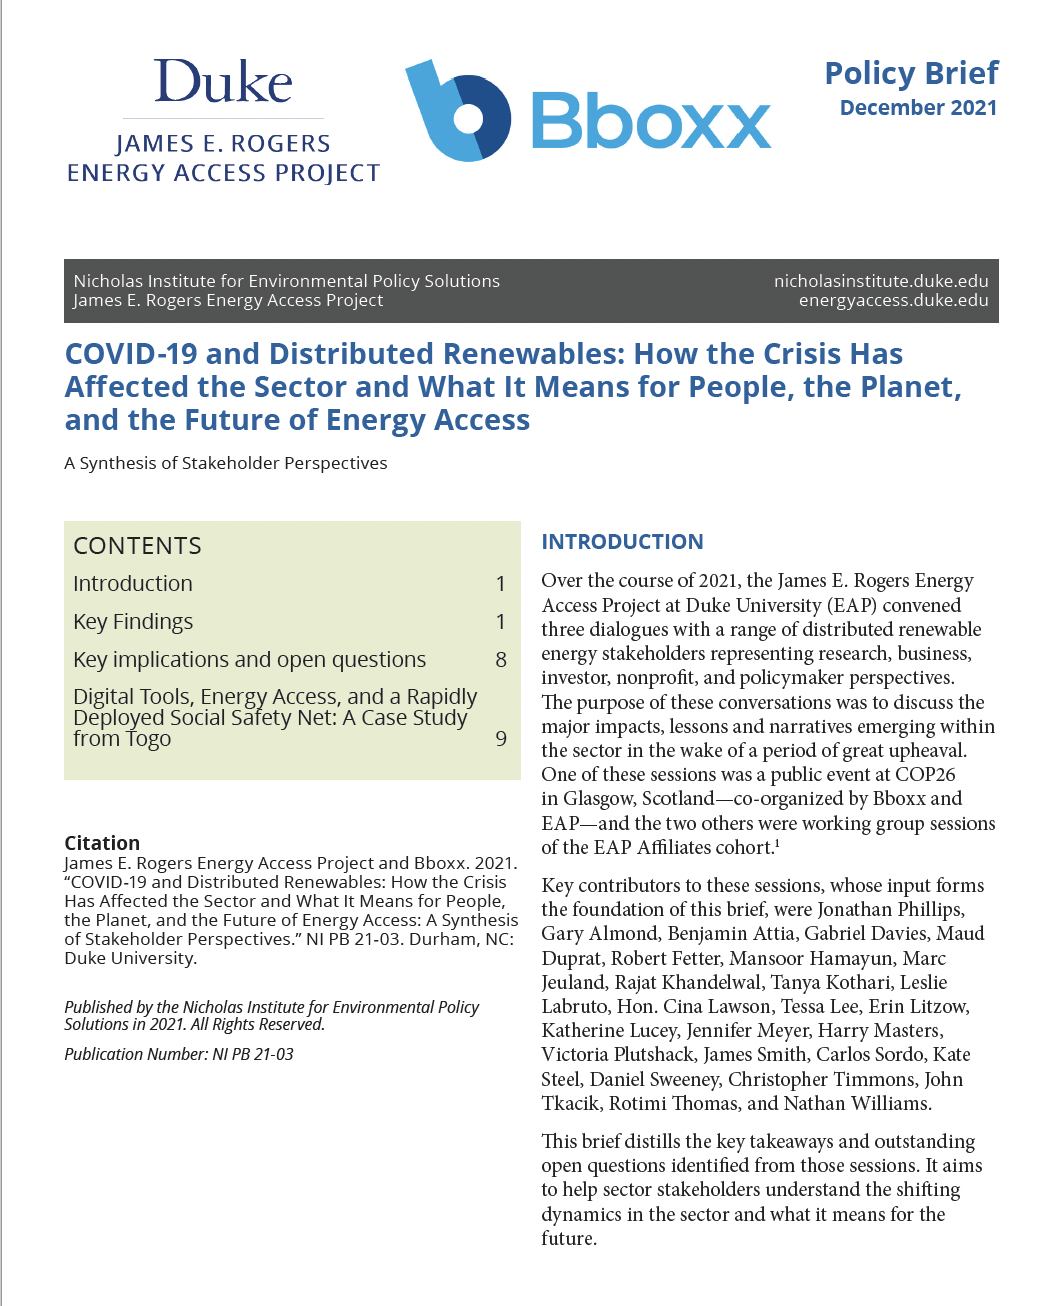 COVID-19 and Distributed Renewables cover